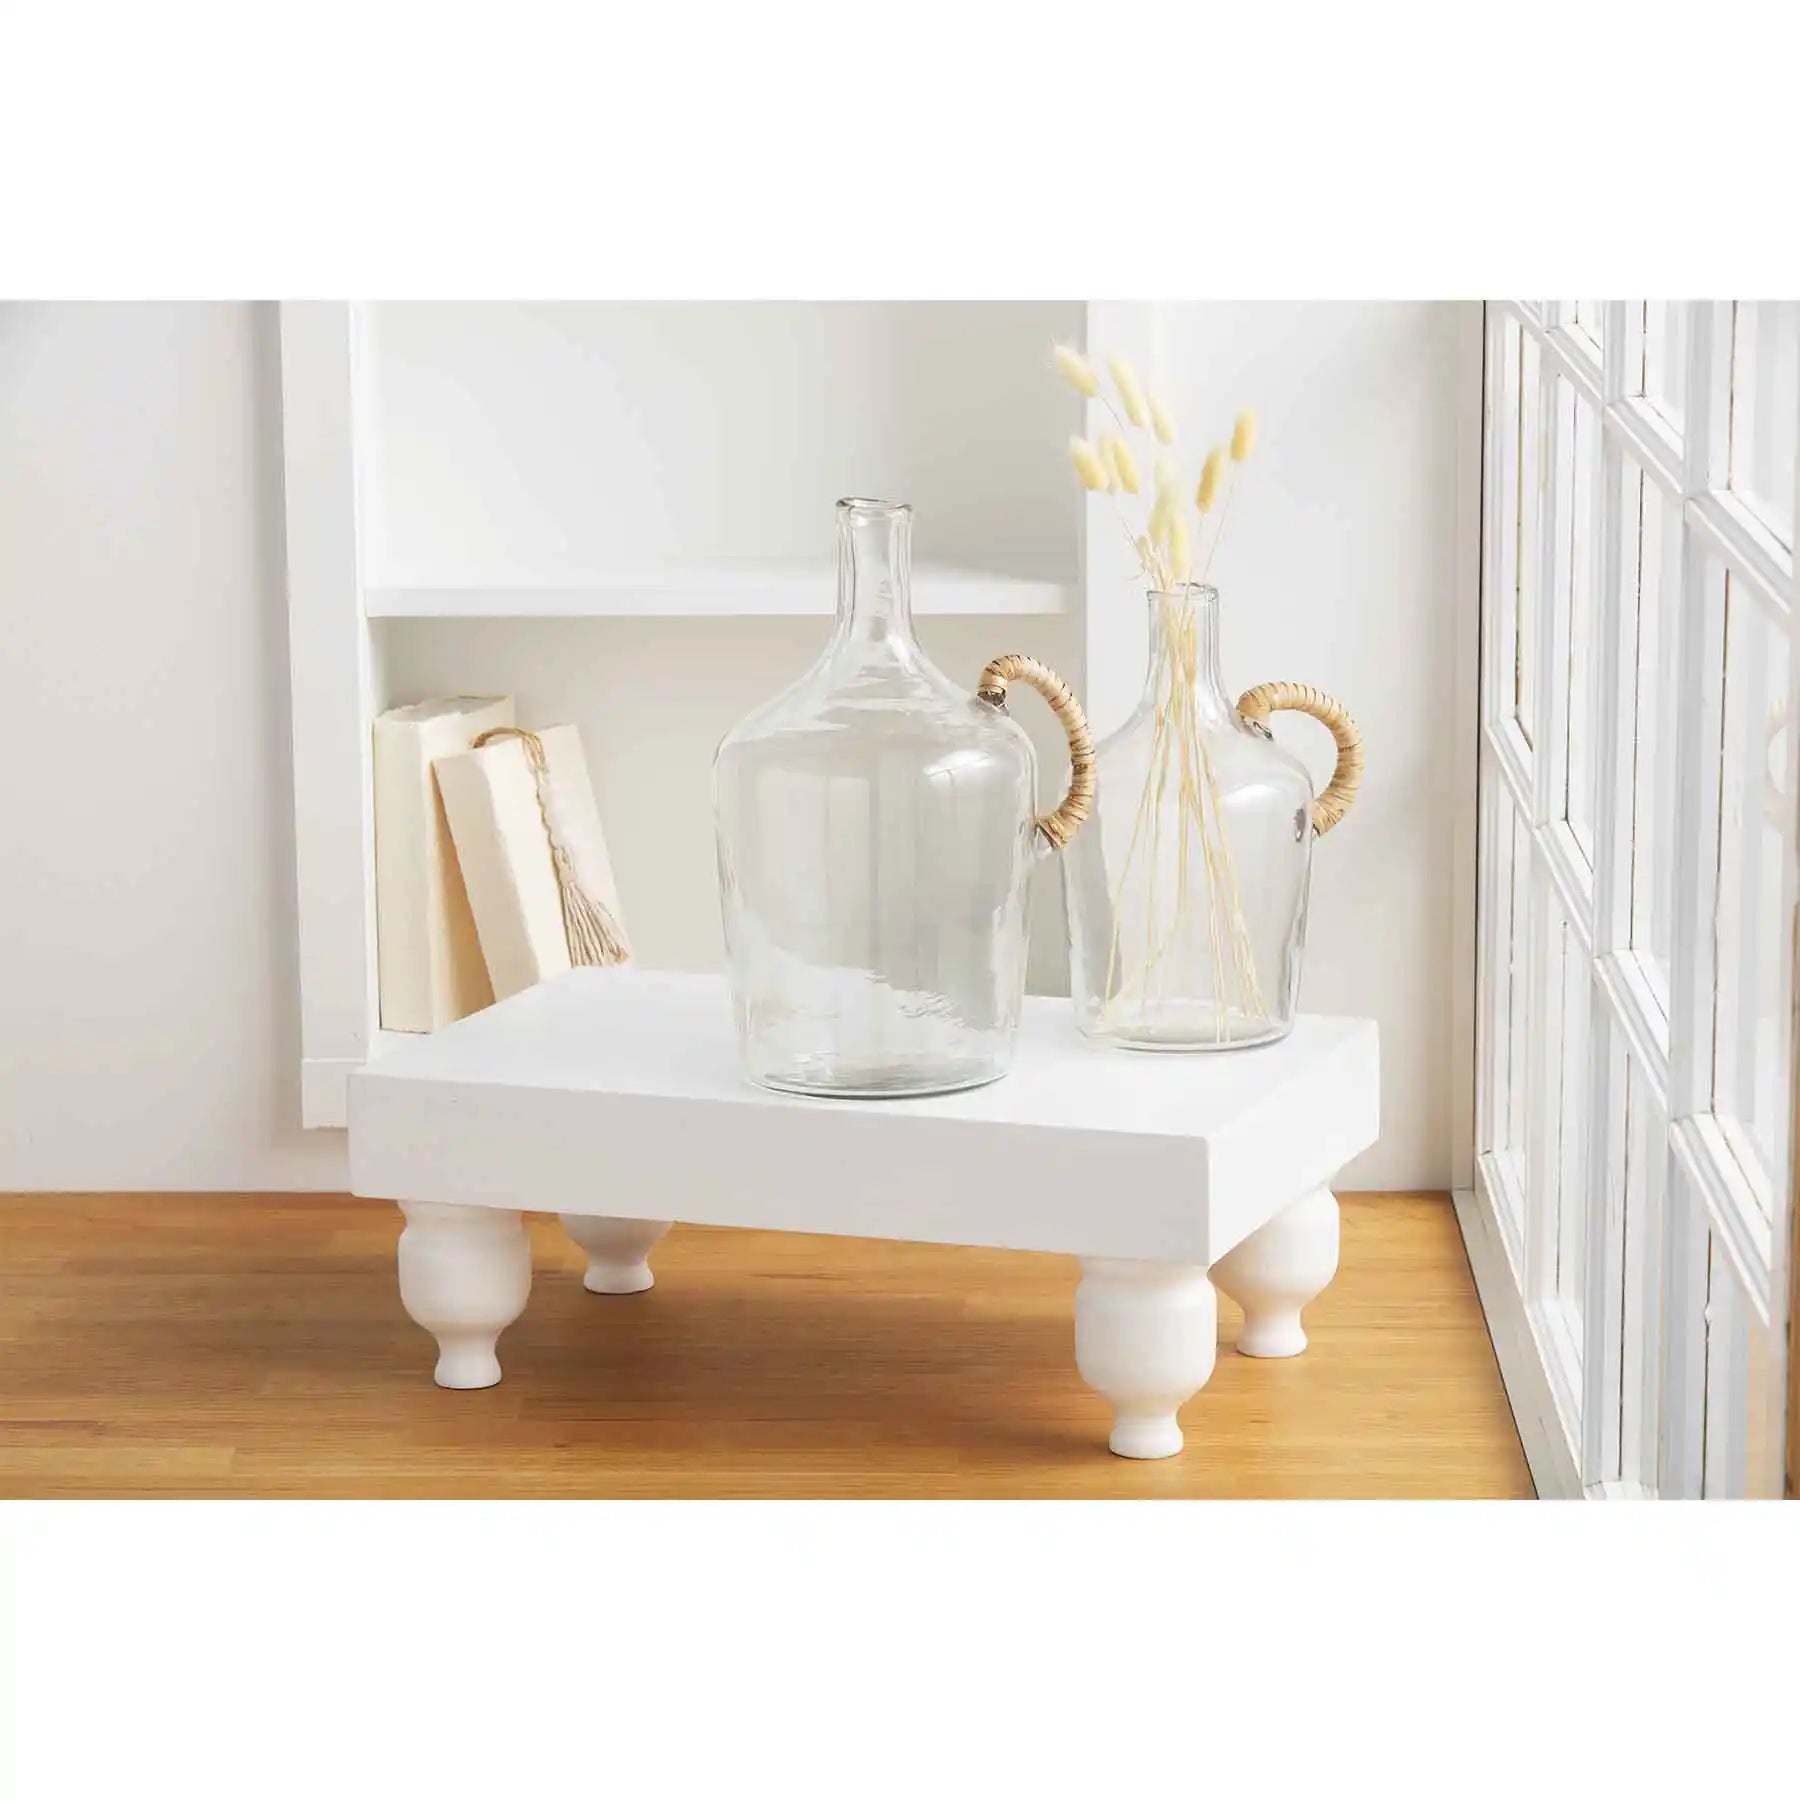 WHITE FOOTED SERVING STAND